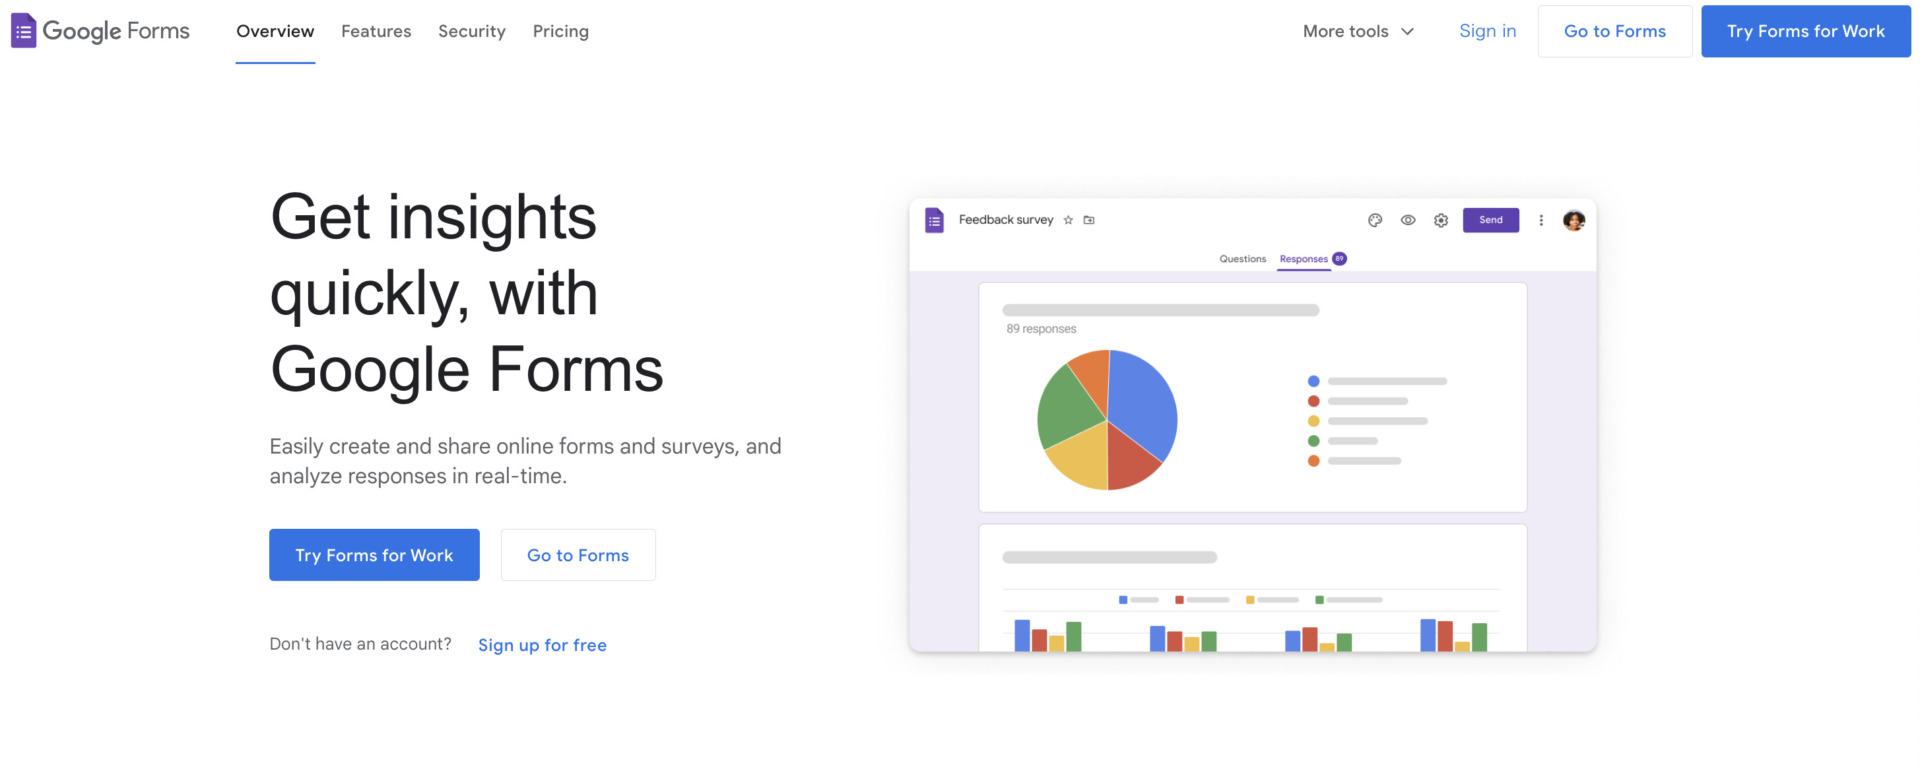 Image of Google Forms